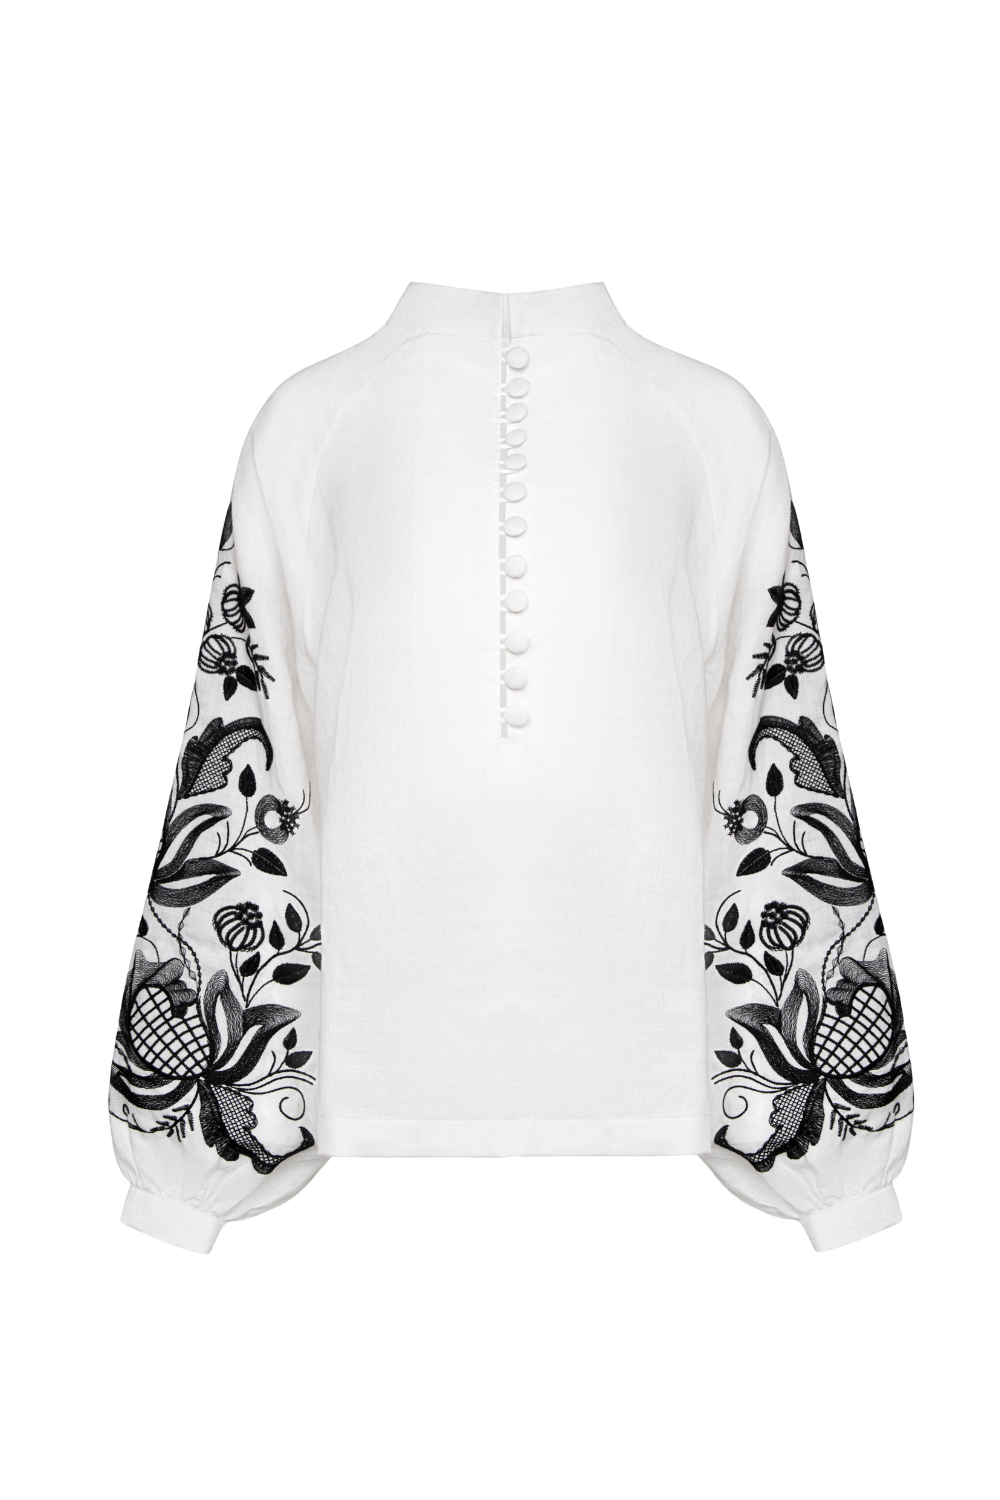 Blouse with buttons Pomegranate vine white embroidery (Gaptuvalnya) G_0024